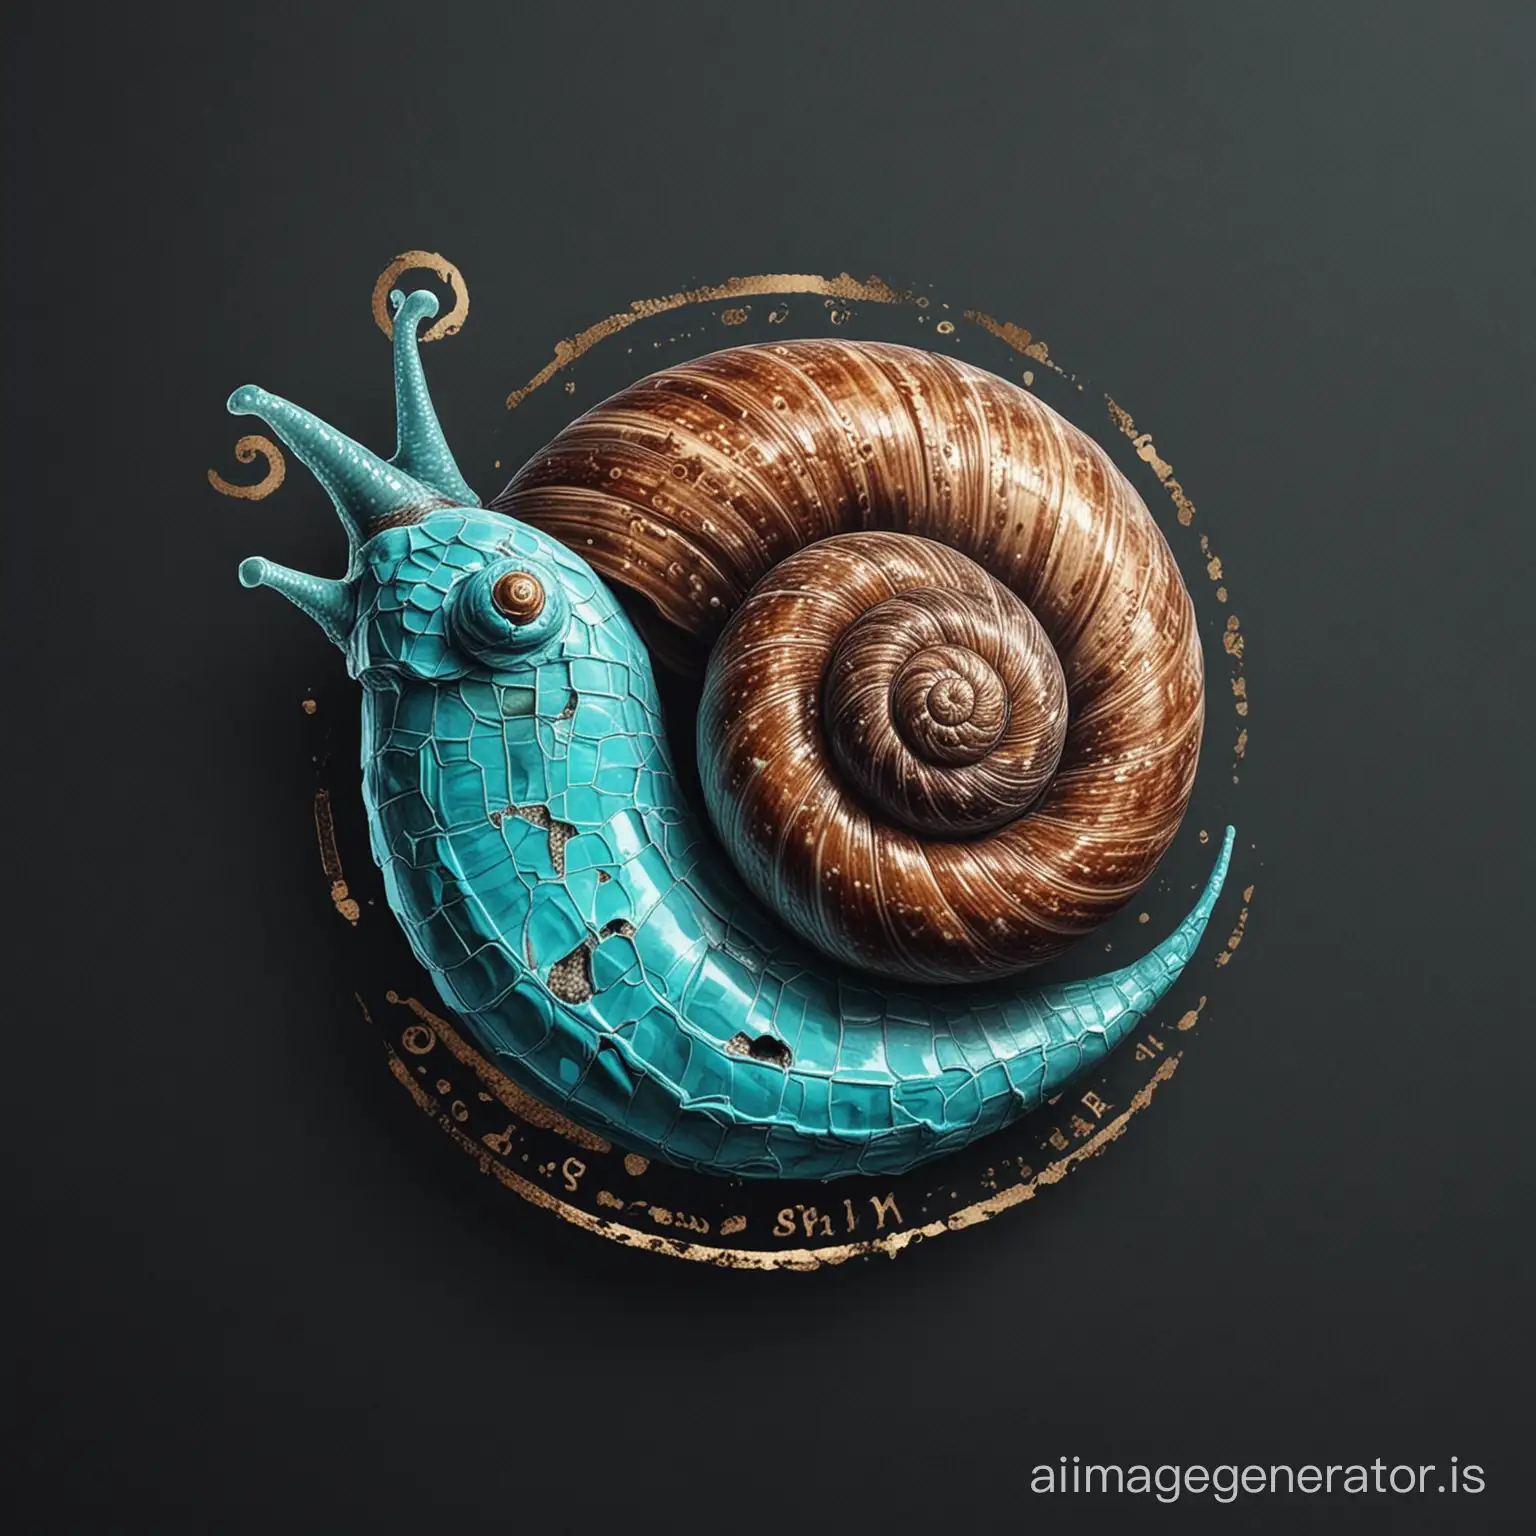 logo of a snail with a shell made of turquoise.